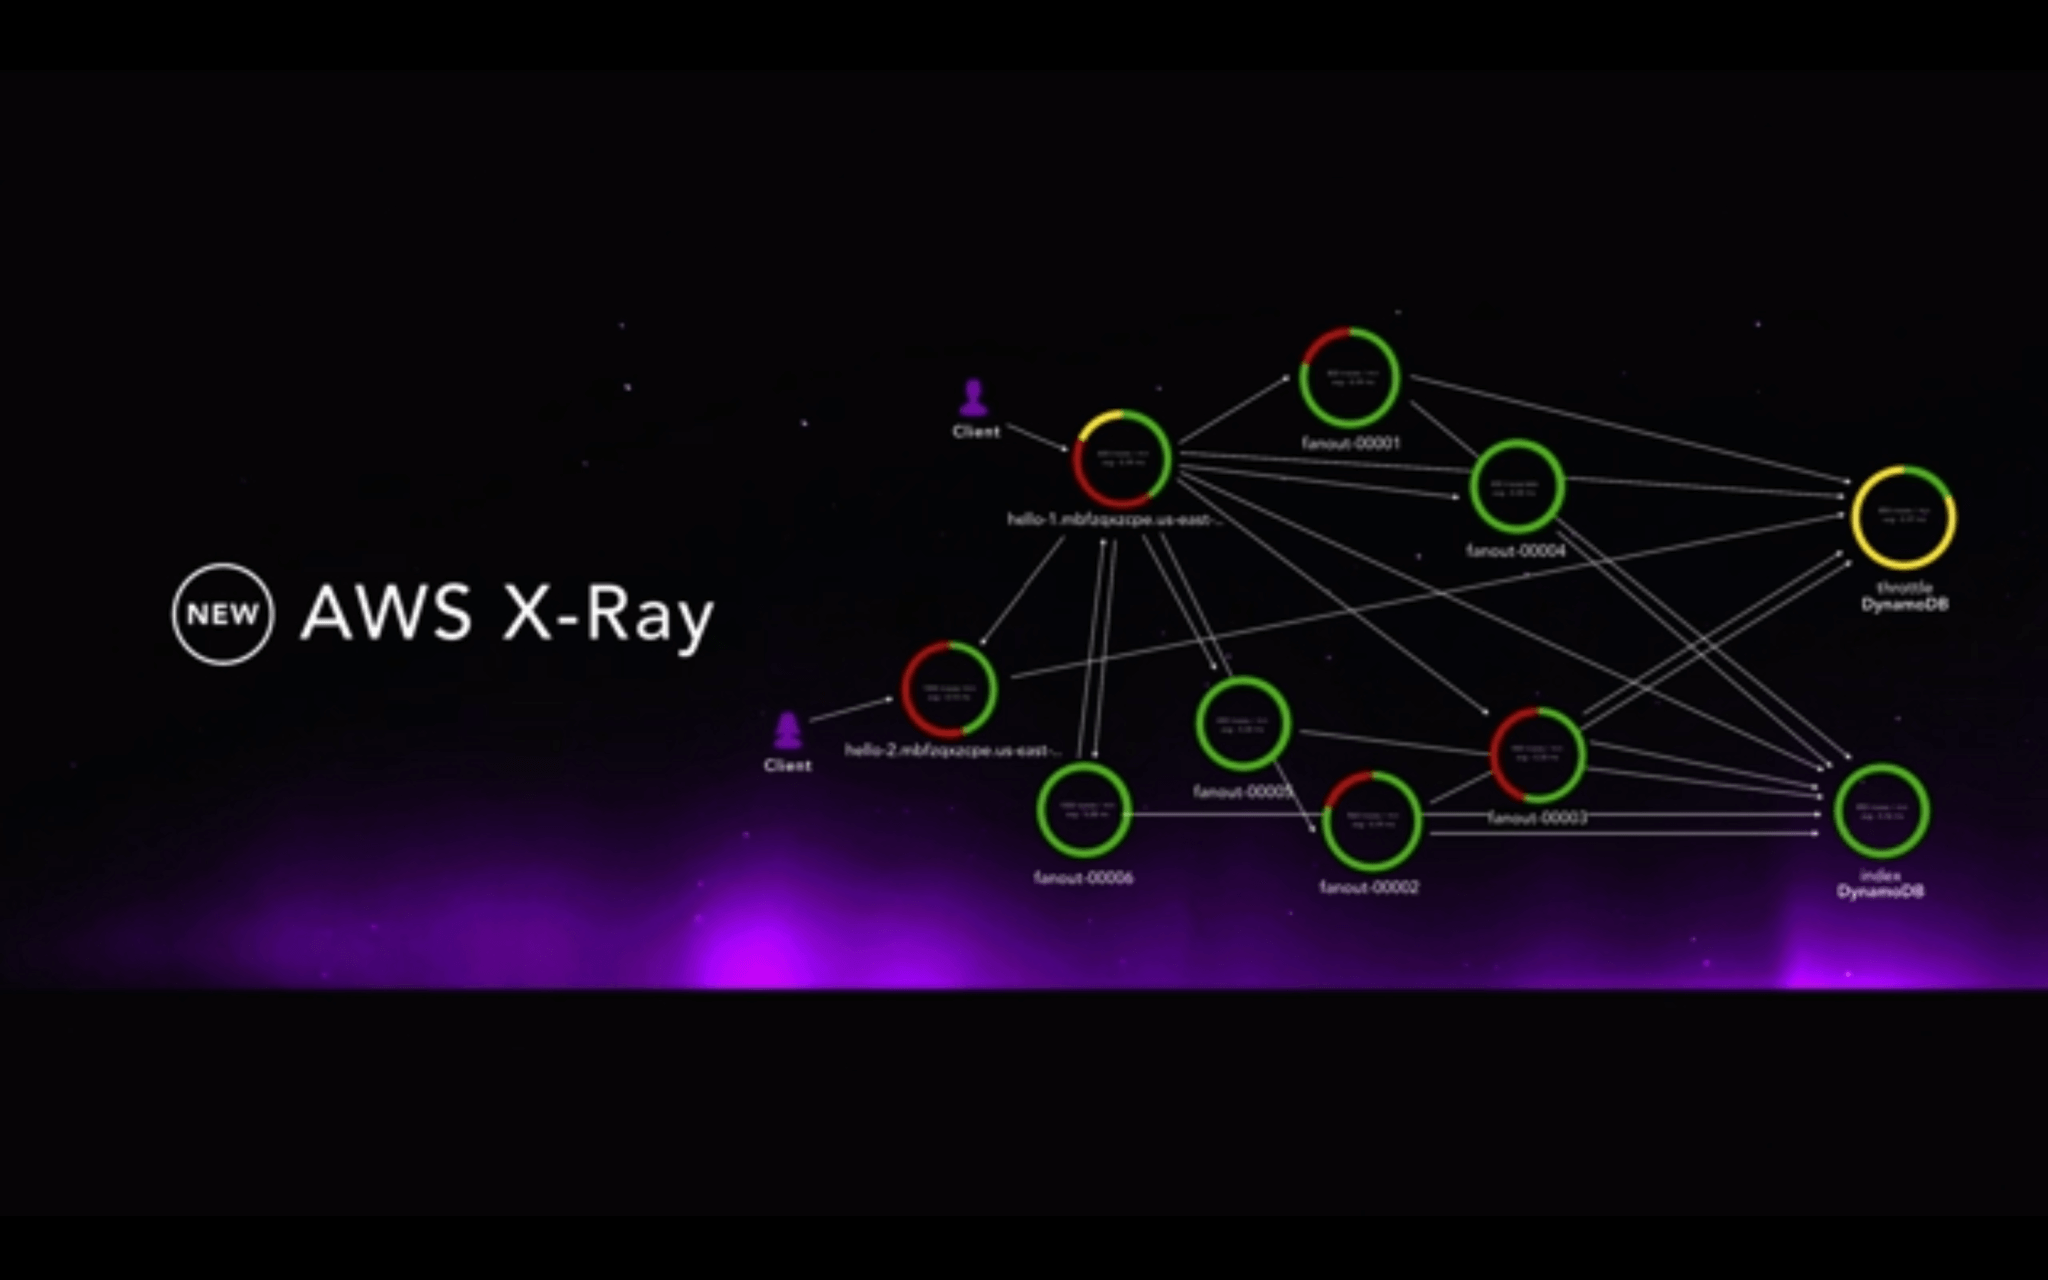 A demonstration of AWS' X-Ray service at AWS re:Invent in Las Vegas on December 1, 2016.